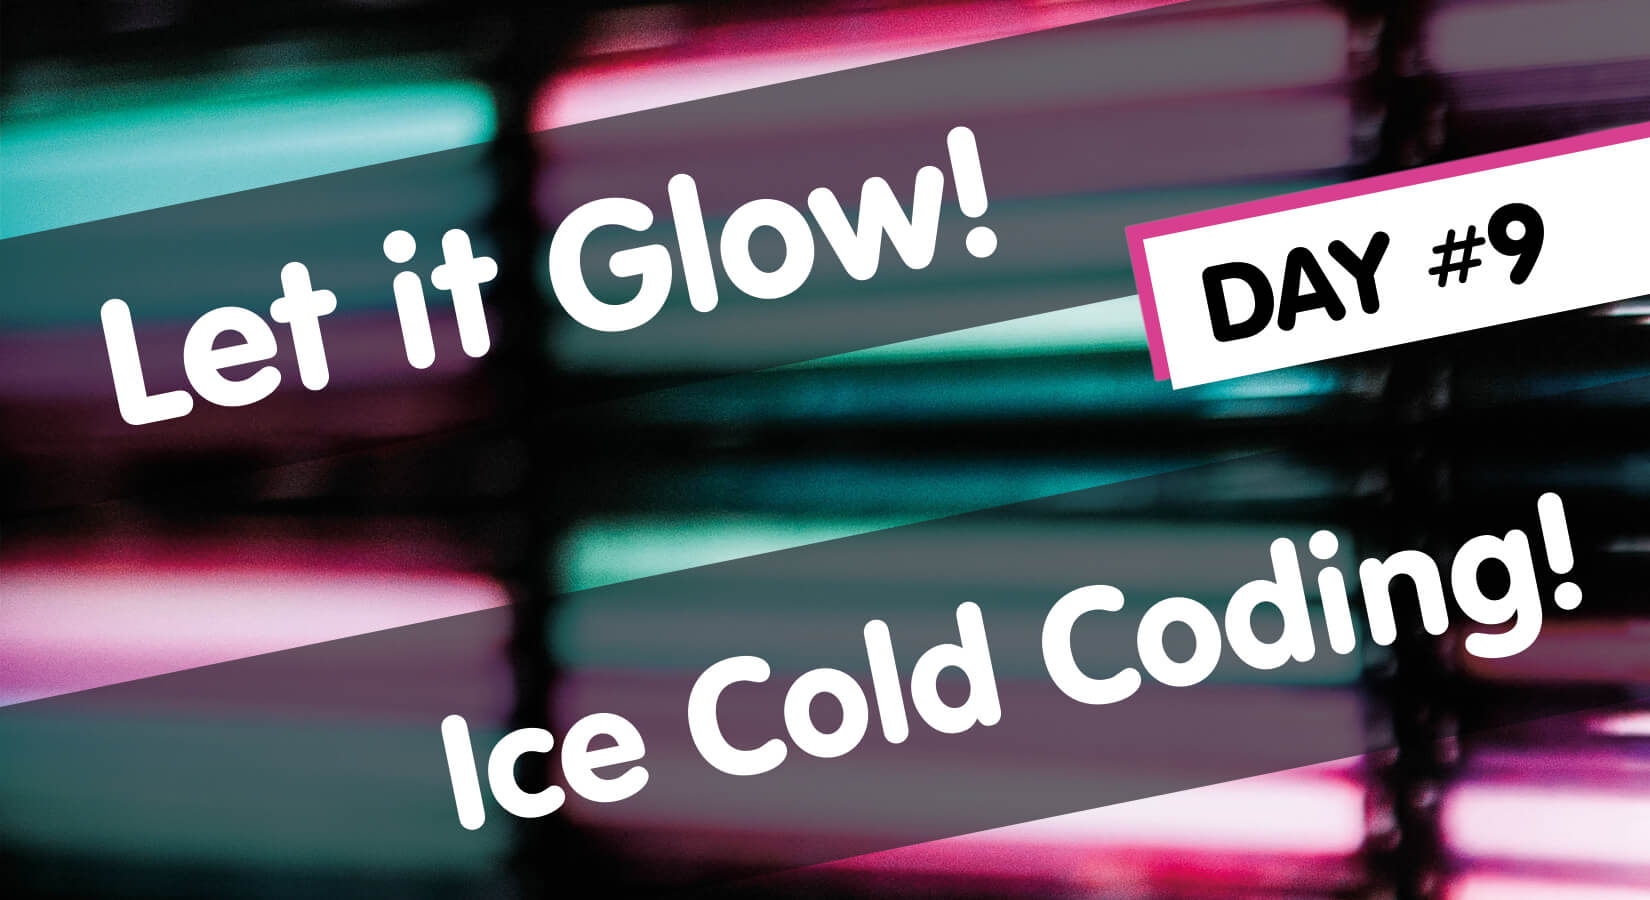 Let it Glow Maker Advent Calendar Day #9: Ice Cold Coding!